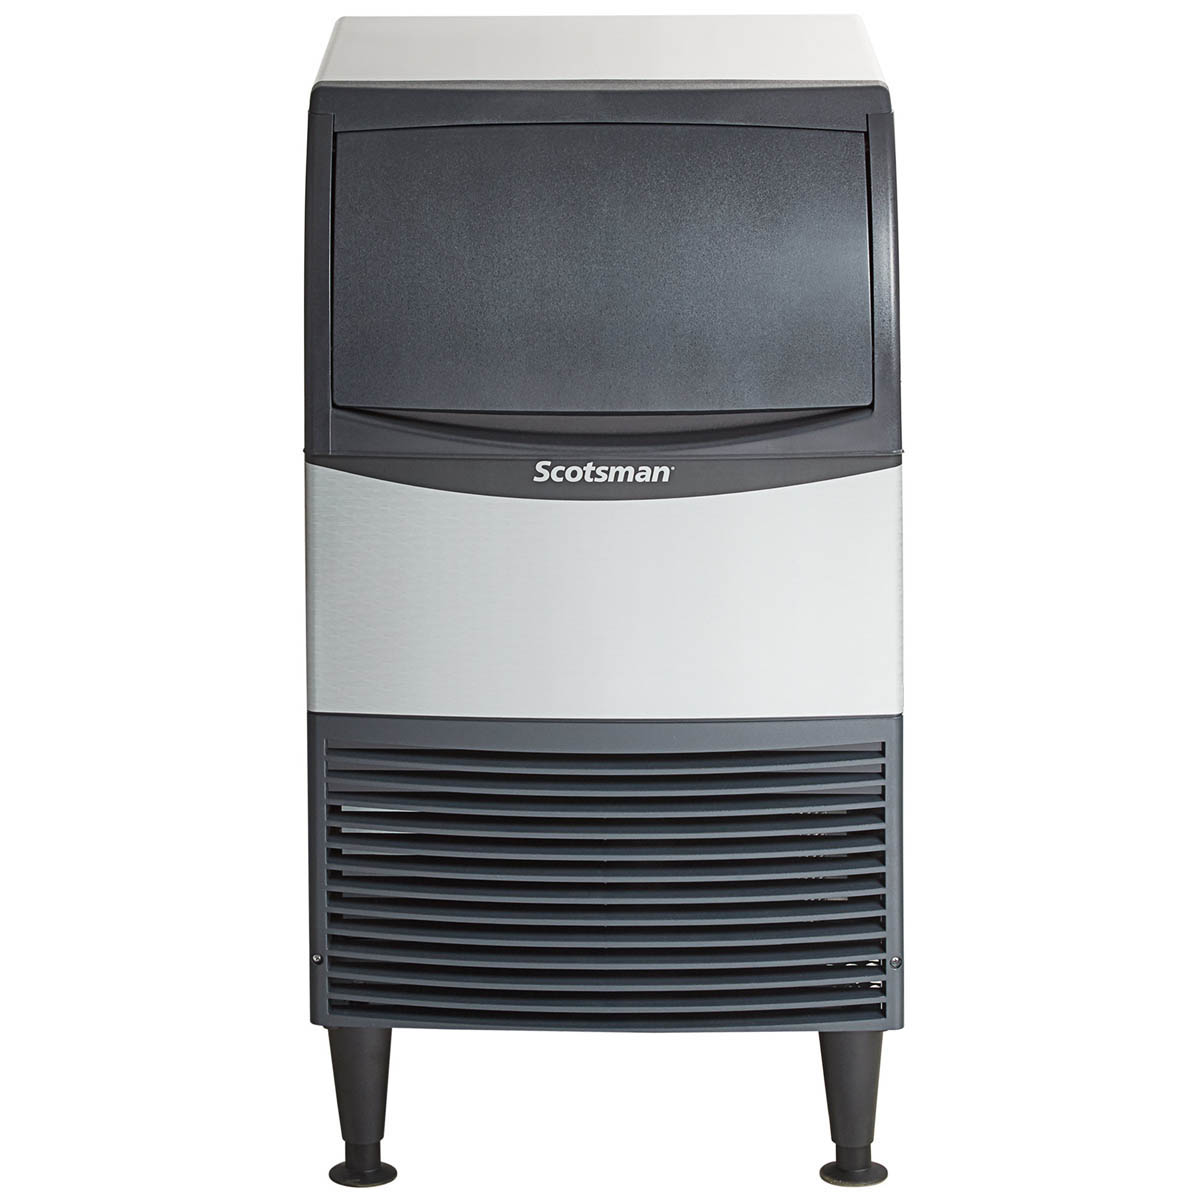 Scotsman UN1520A-1 Provides Soft and Slow Melting For Your Service and Displays, Chef's Deal